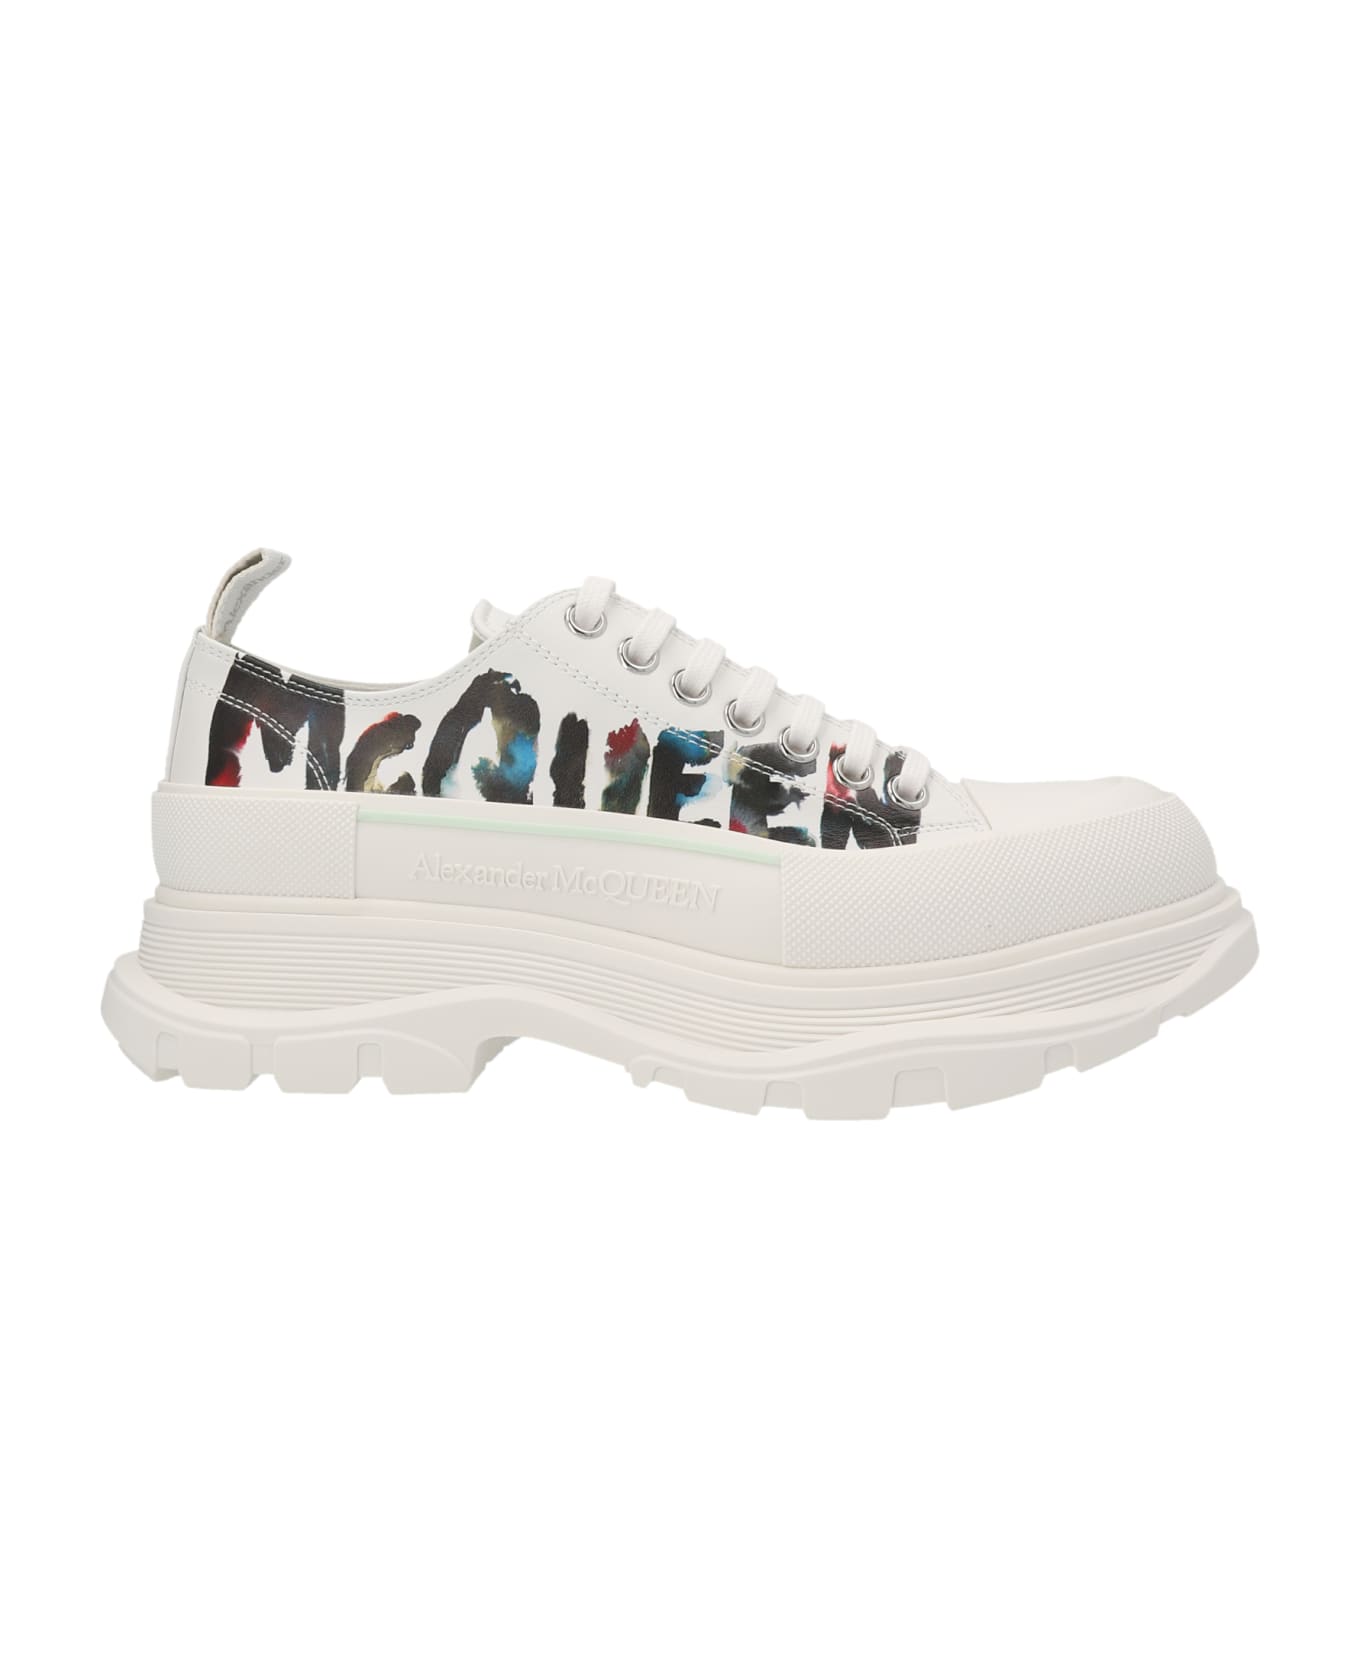 Alexander McQueen Tread Slick Lace-up Shoes - Op Wh Whi Sil Multi